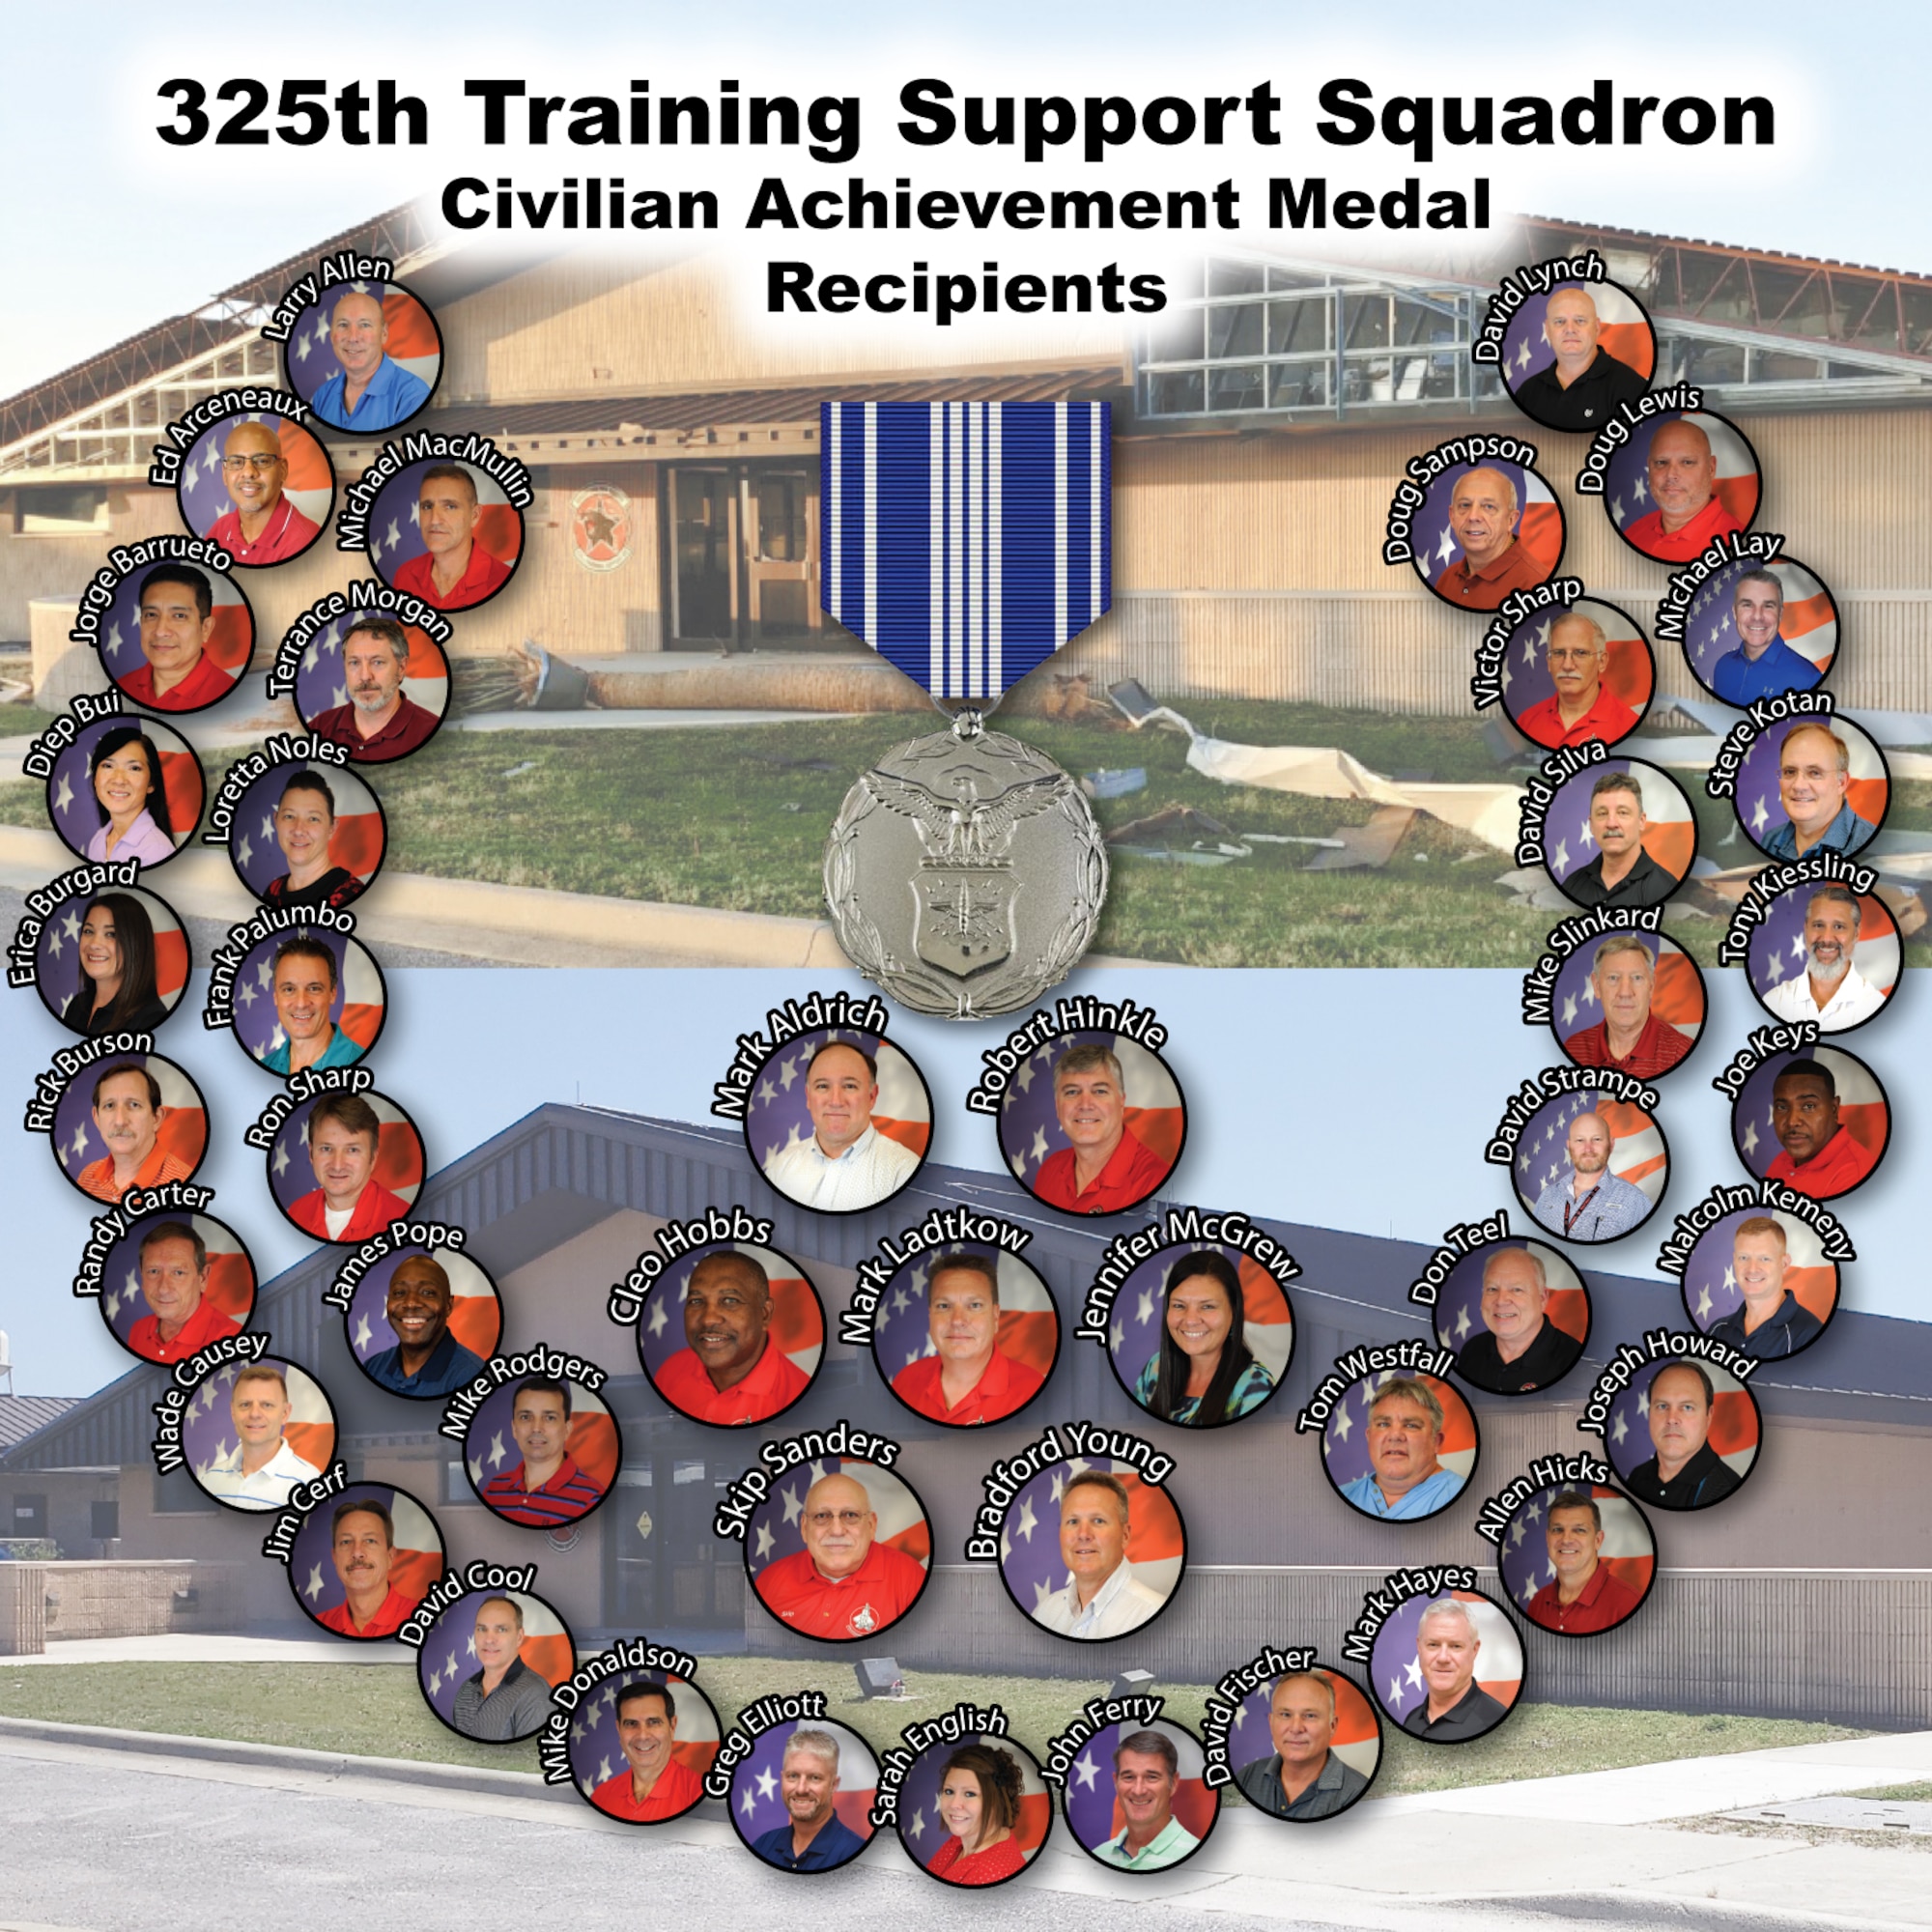 Forty-six civilian employees from the 325th Training Support Squadron received Civilian Achievement medals after Hurricane Michael hit Tyndall Air Force Base, Florida, in October of 2018.